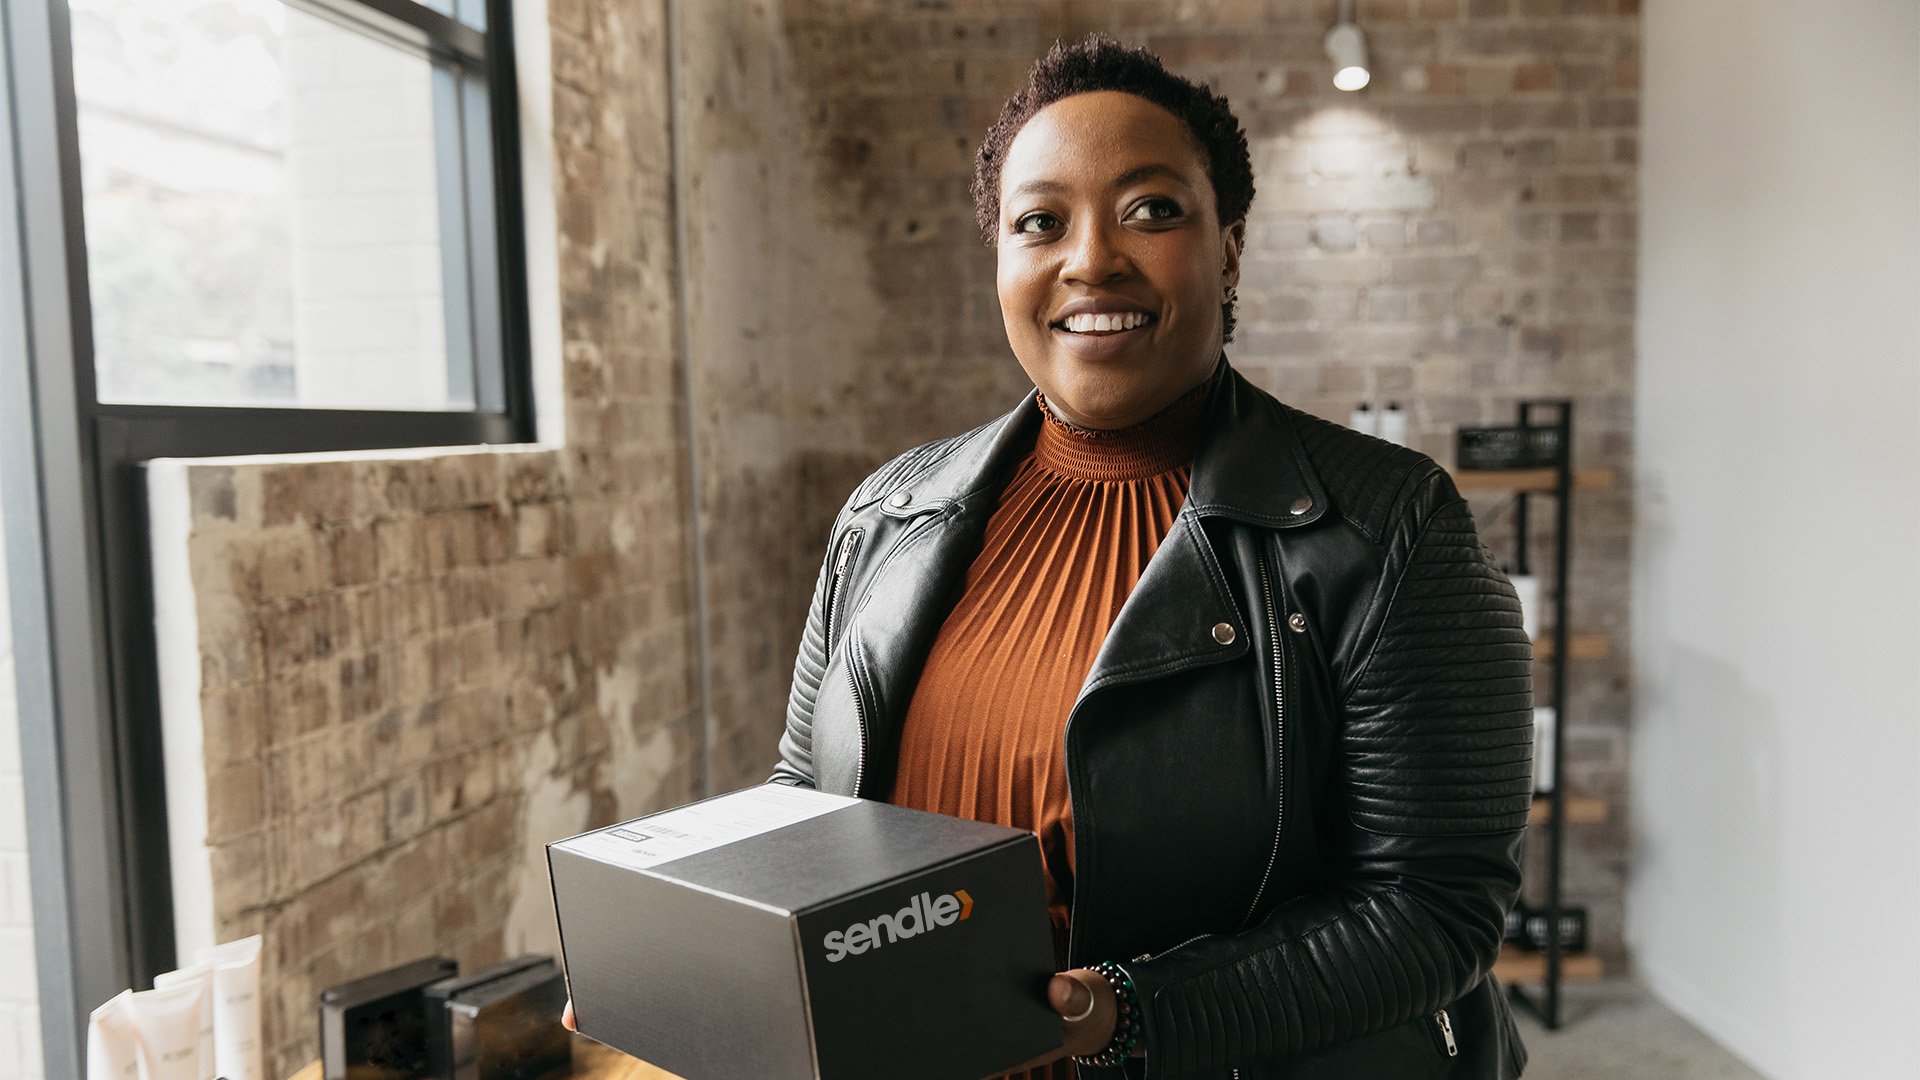 sendle image of black woman female business owner who ships sustainably